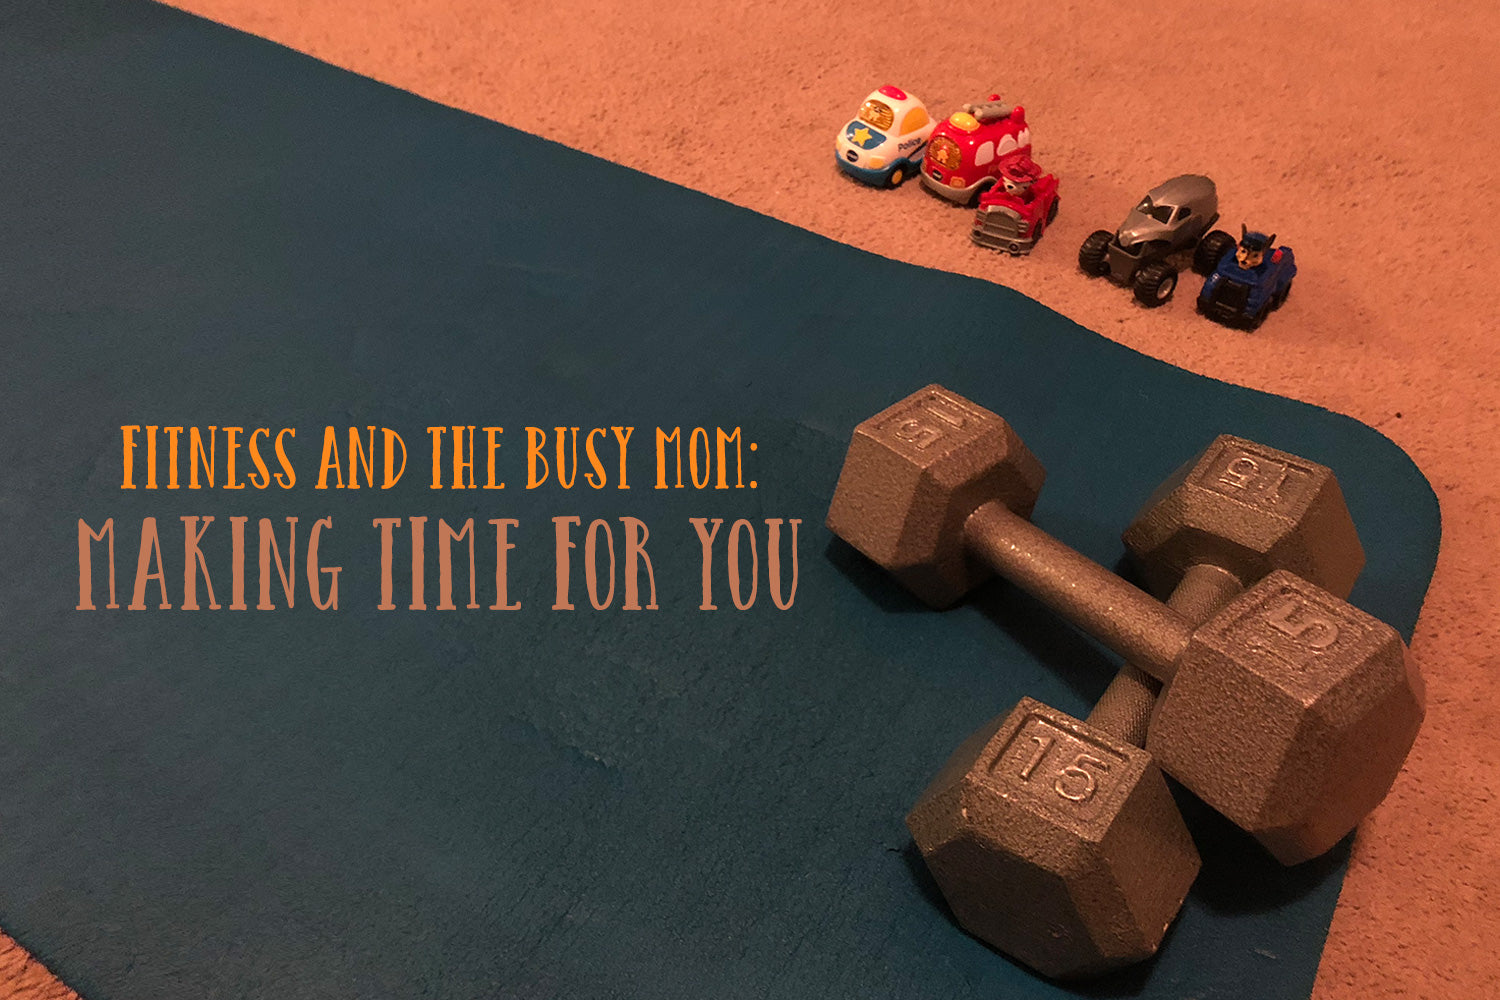 Fitness and the busy mom: Making time for you